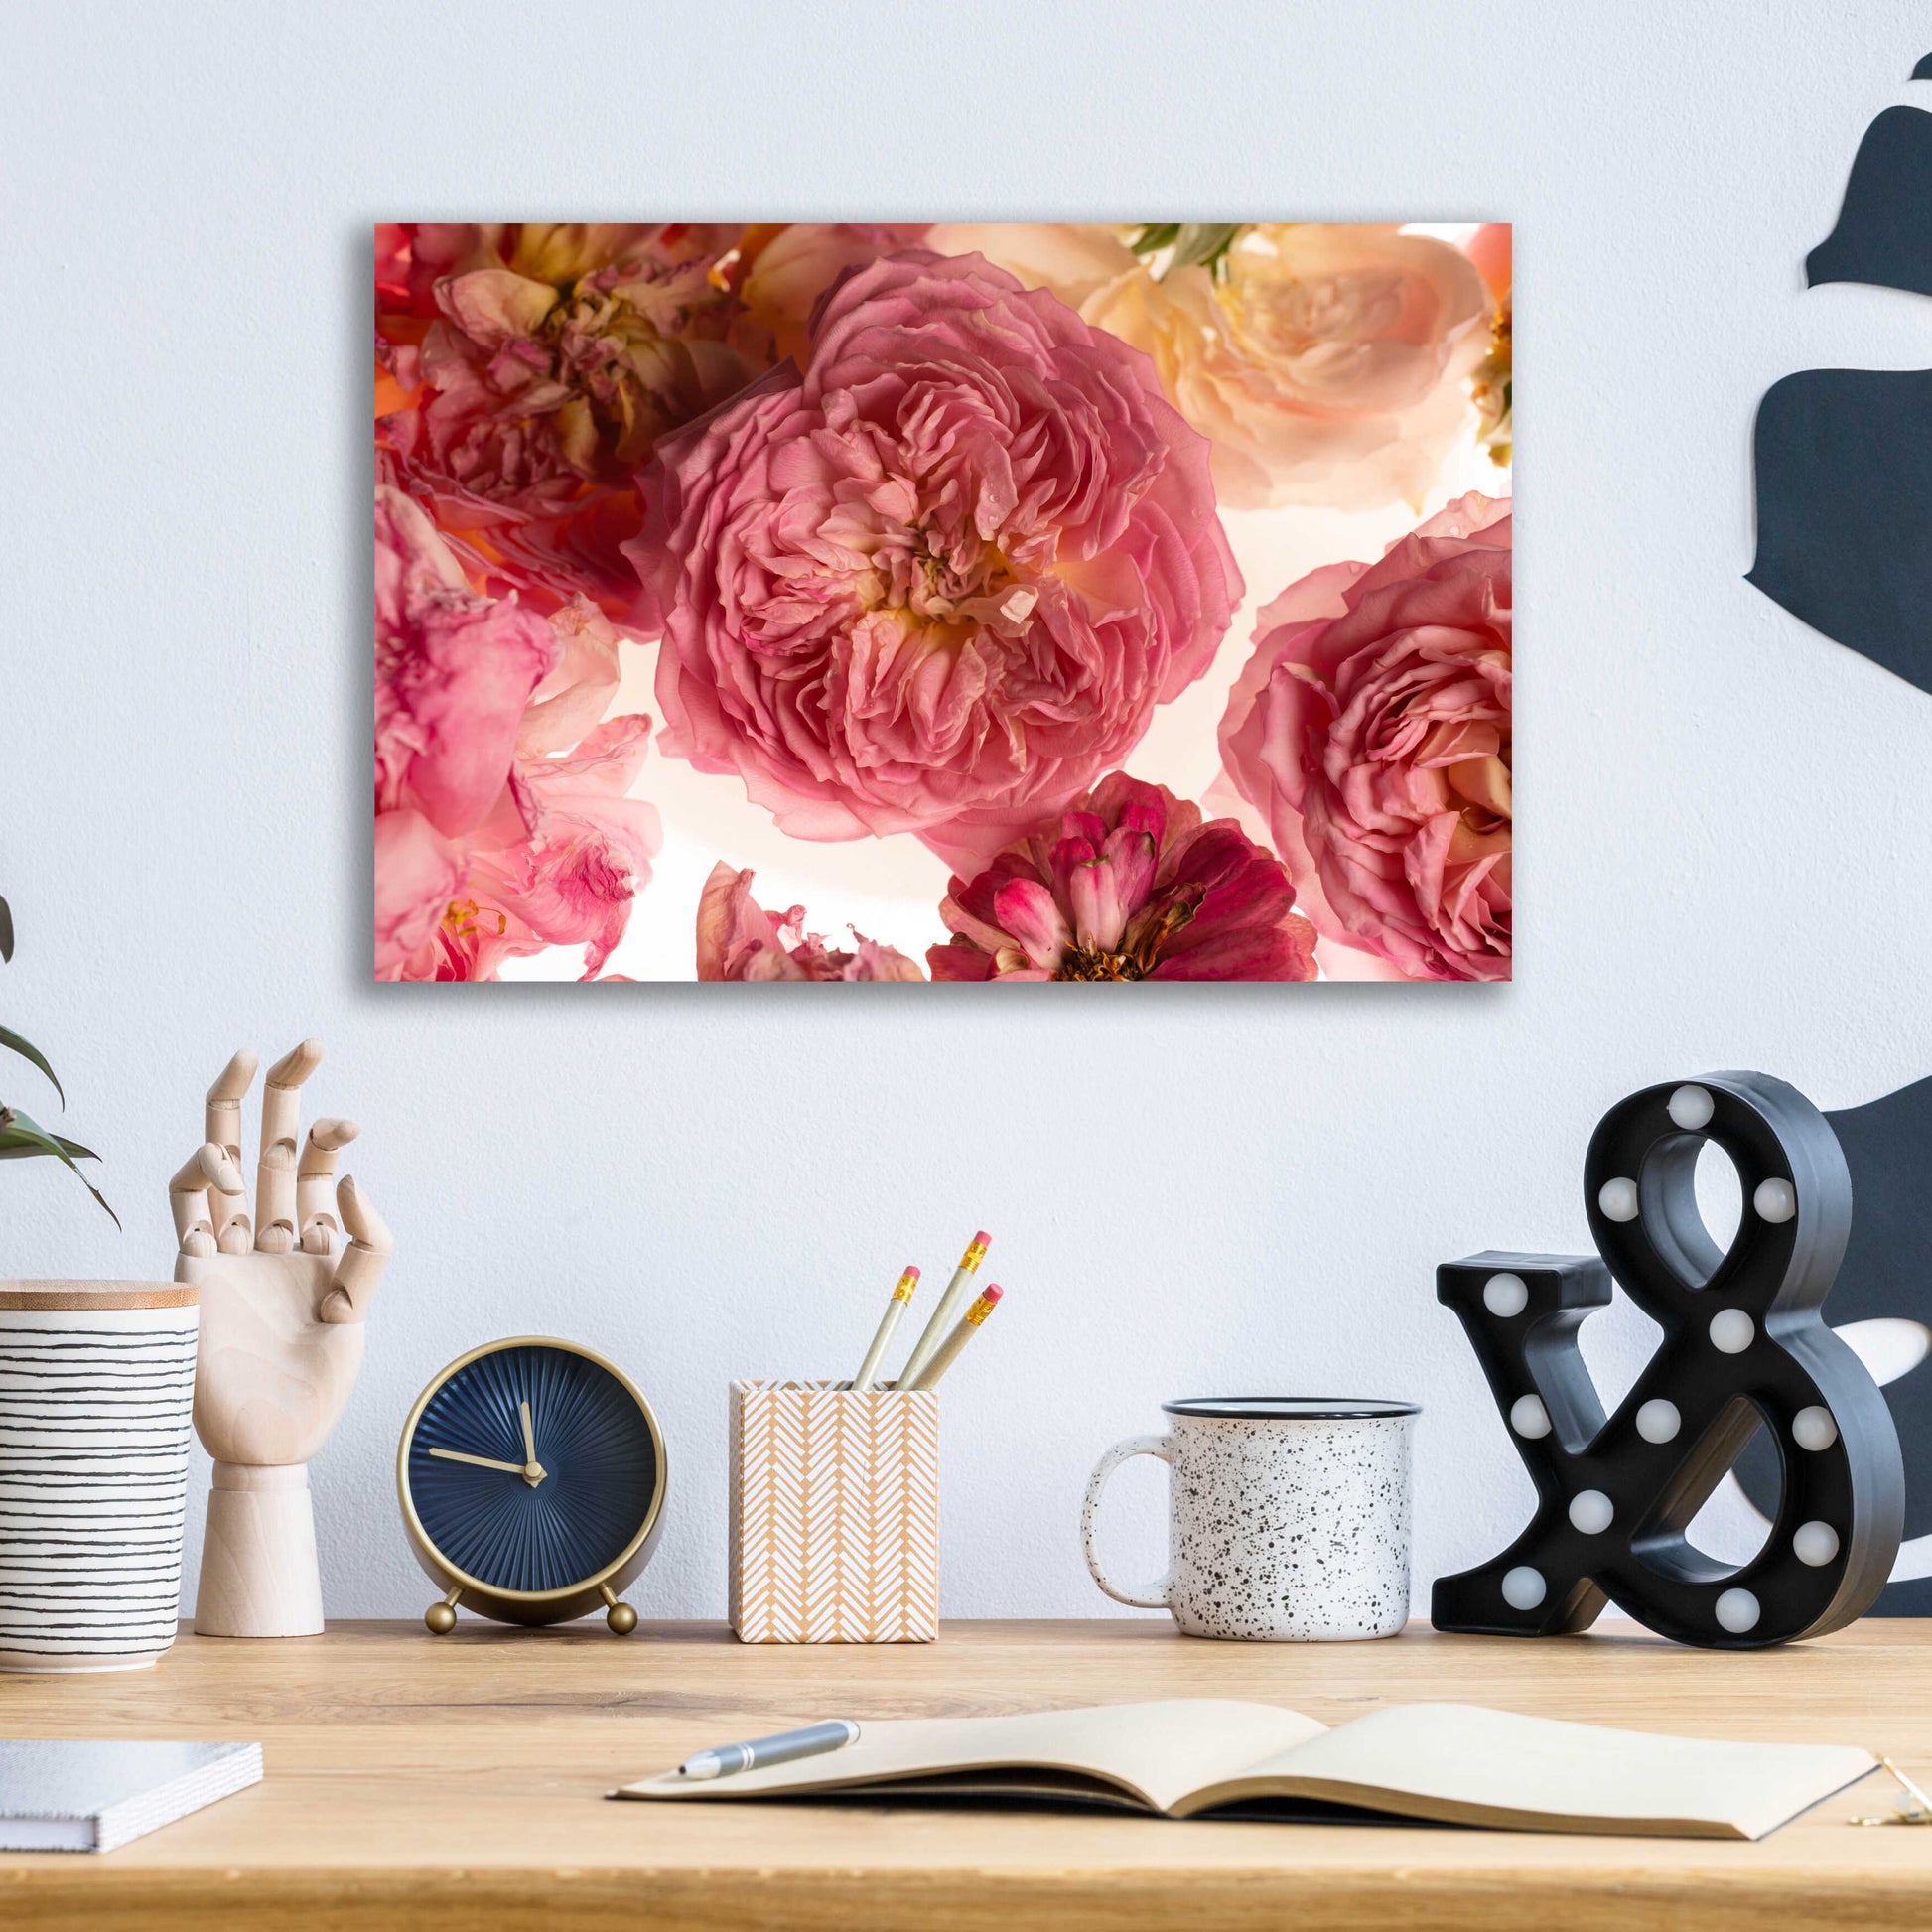 Epic Art 'Rose on White' by Leah McLean, Acrylic Glass Wall Art,16x12